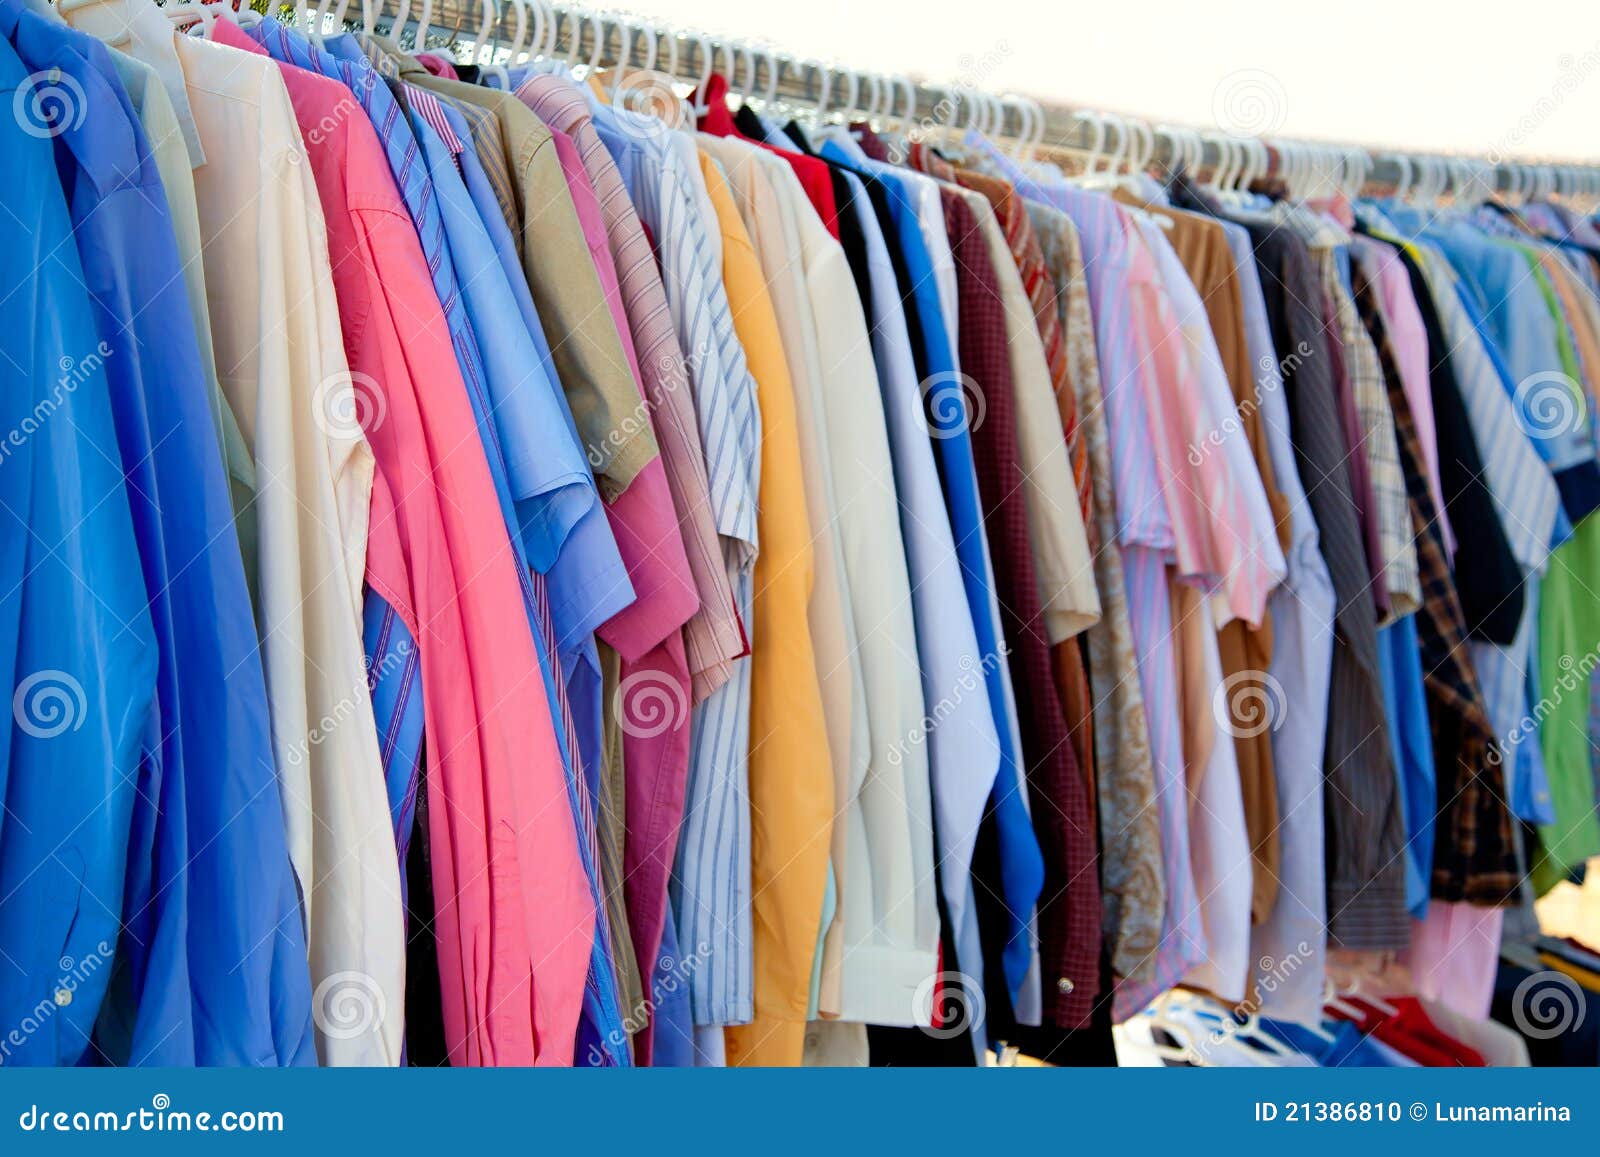 fashion shirt rack with colorful clothes